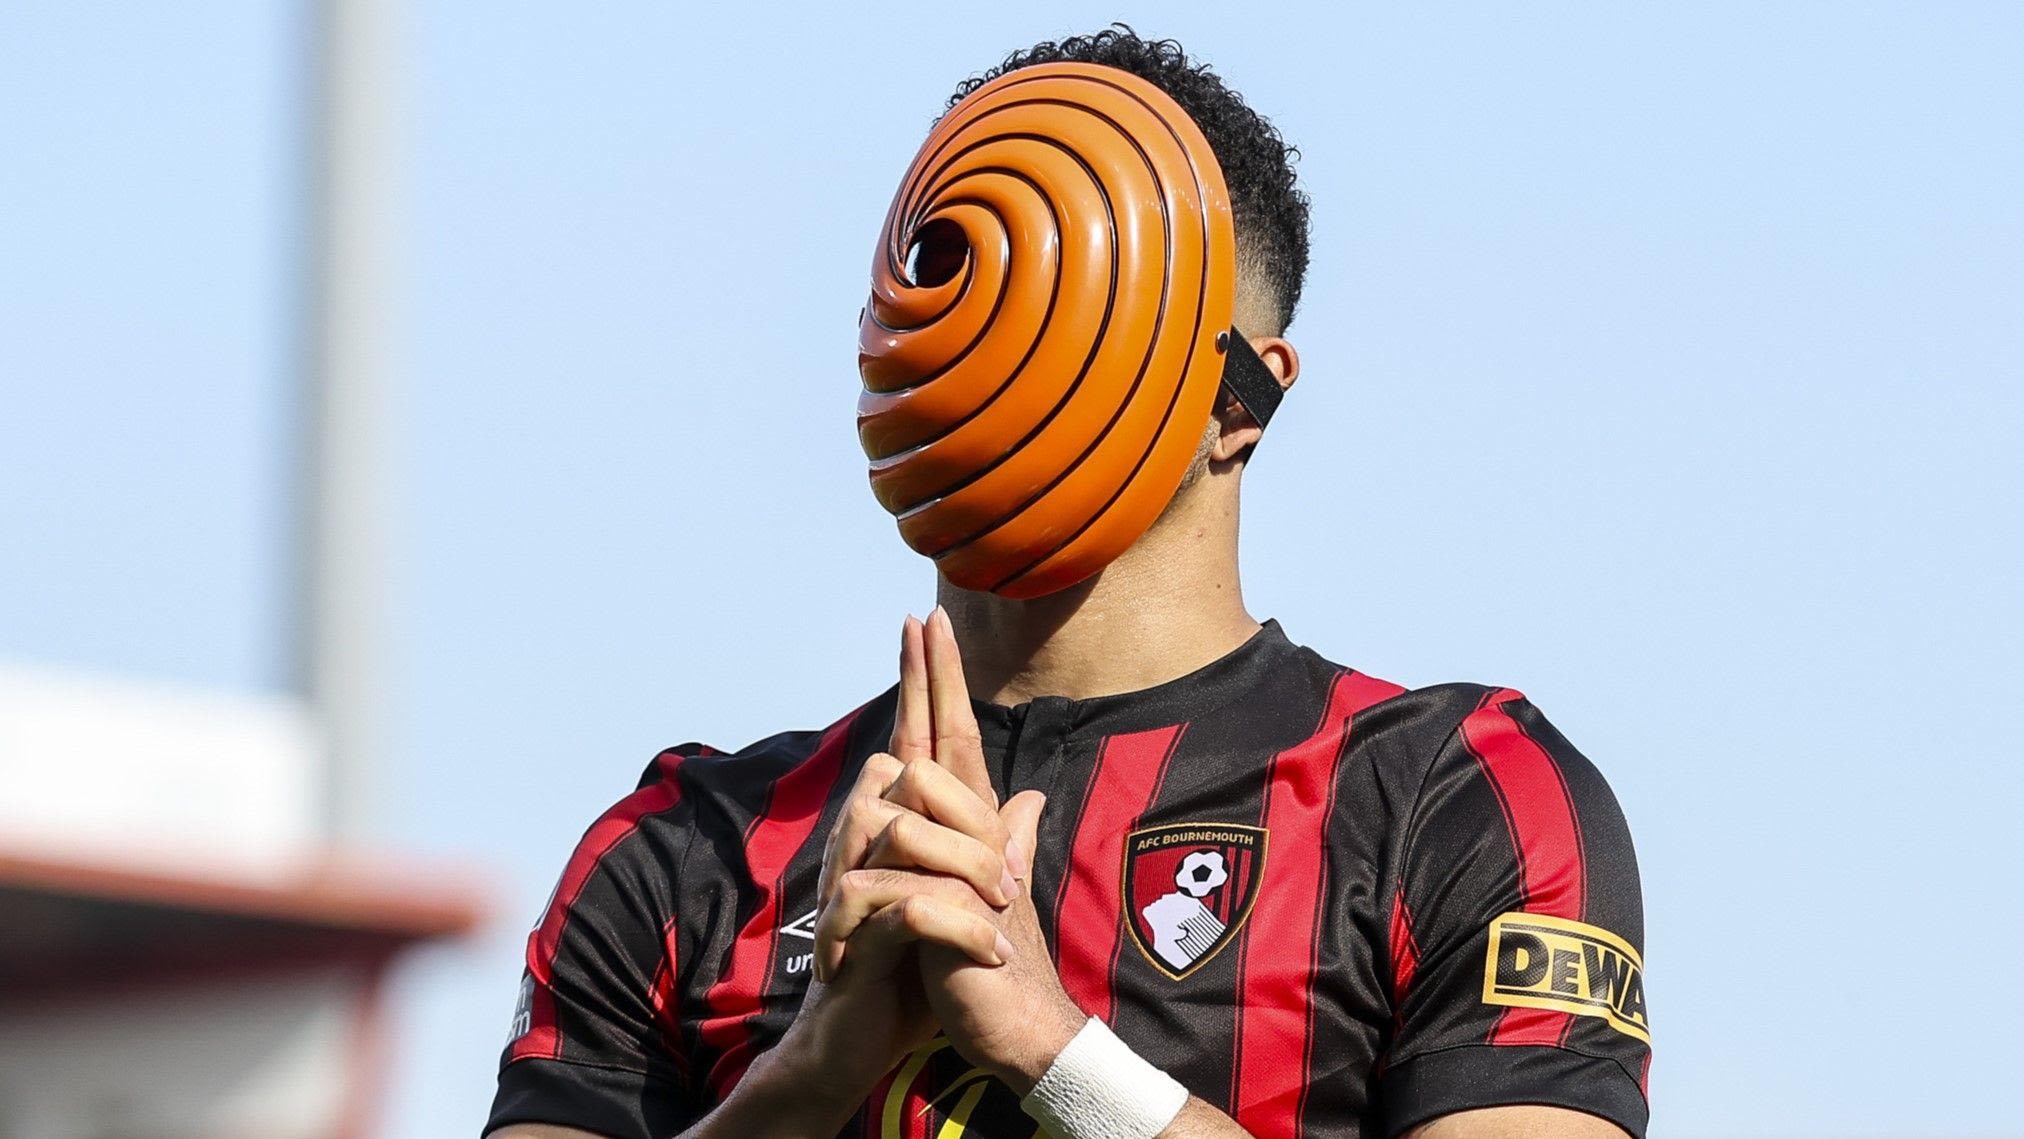 Facing up - the players who wore masks before Mbappe